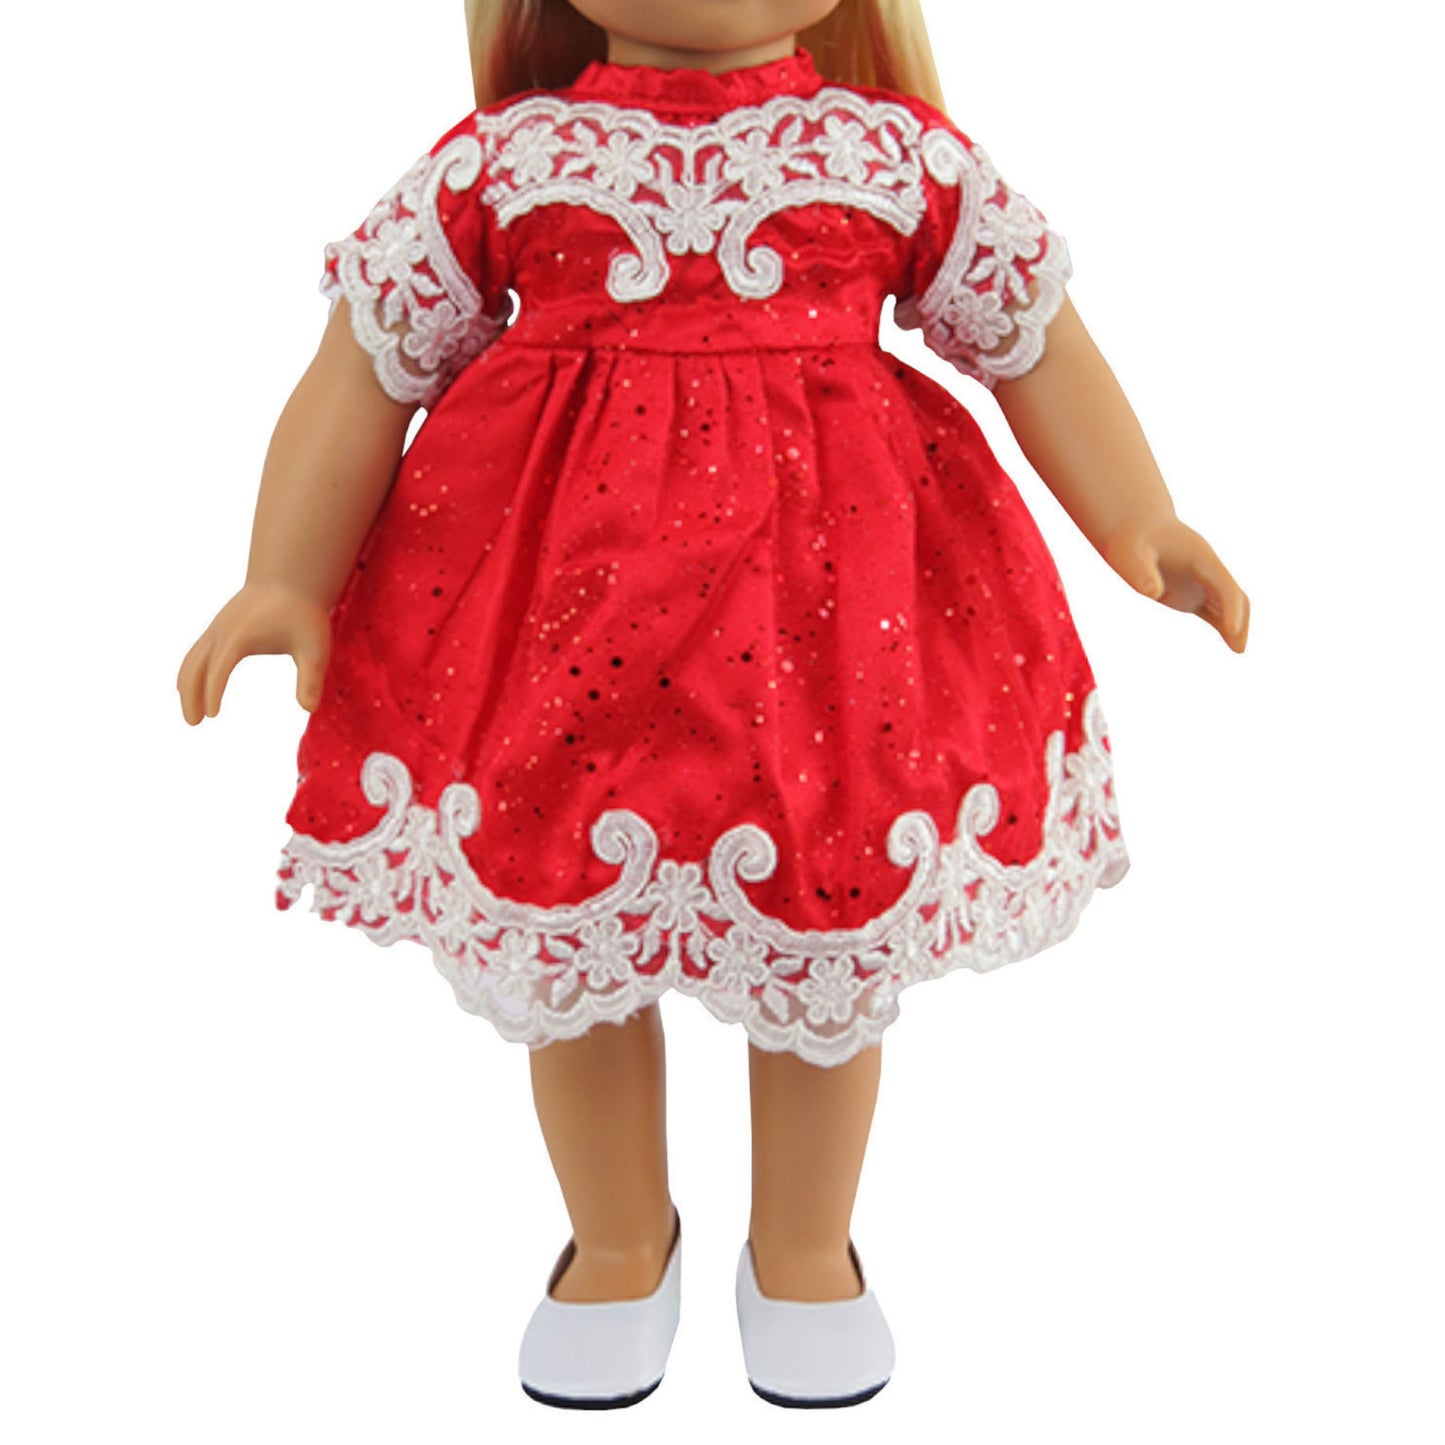 Red Dress with White Embroidery for 18-inch dolls with doll